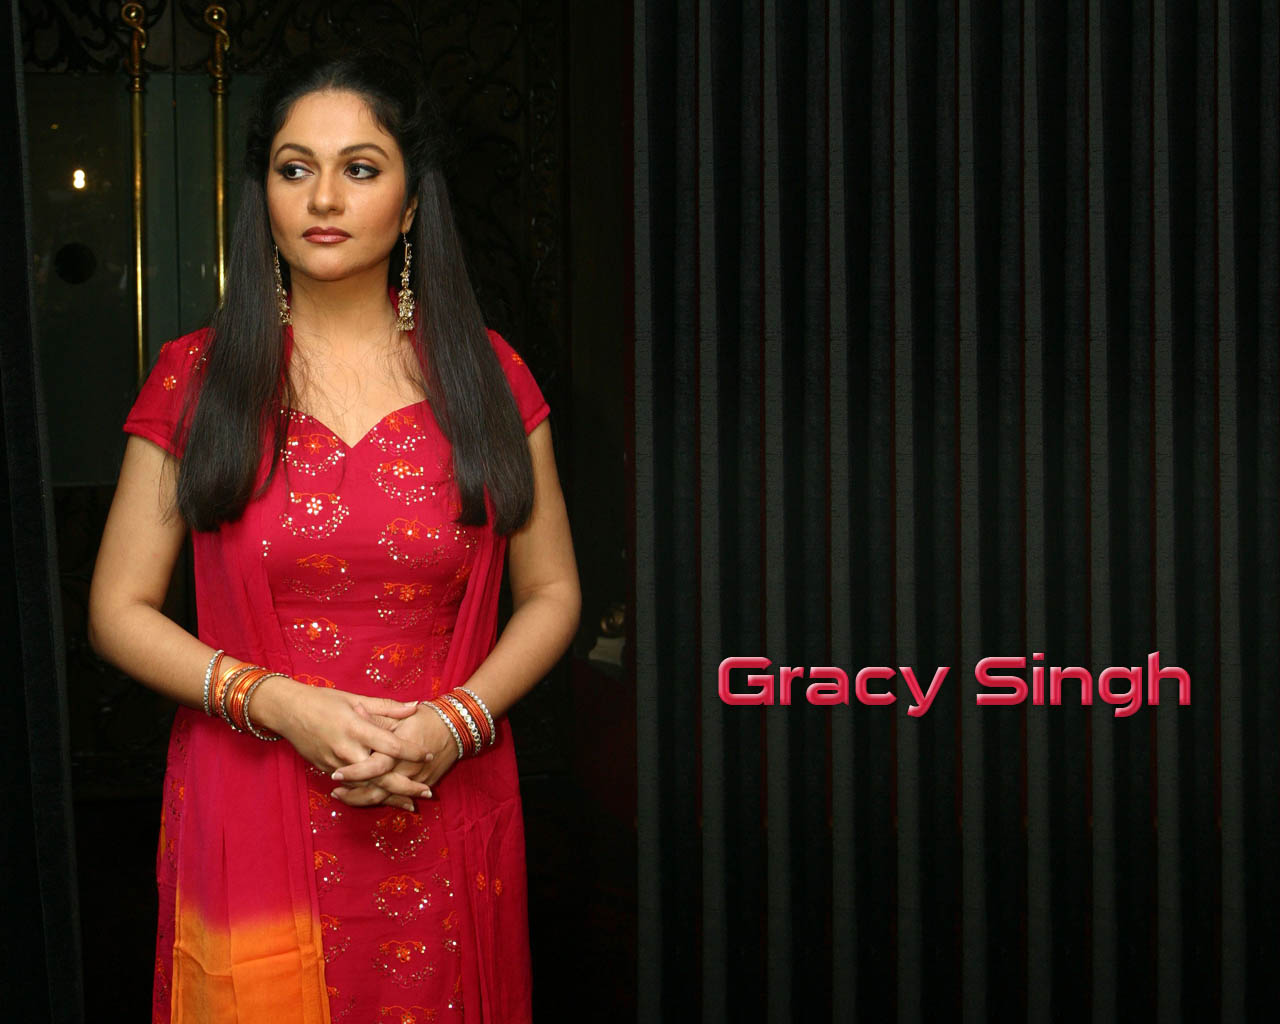 Gracy singh latest picture